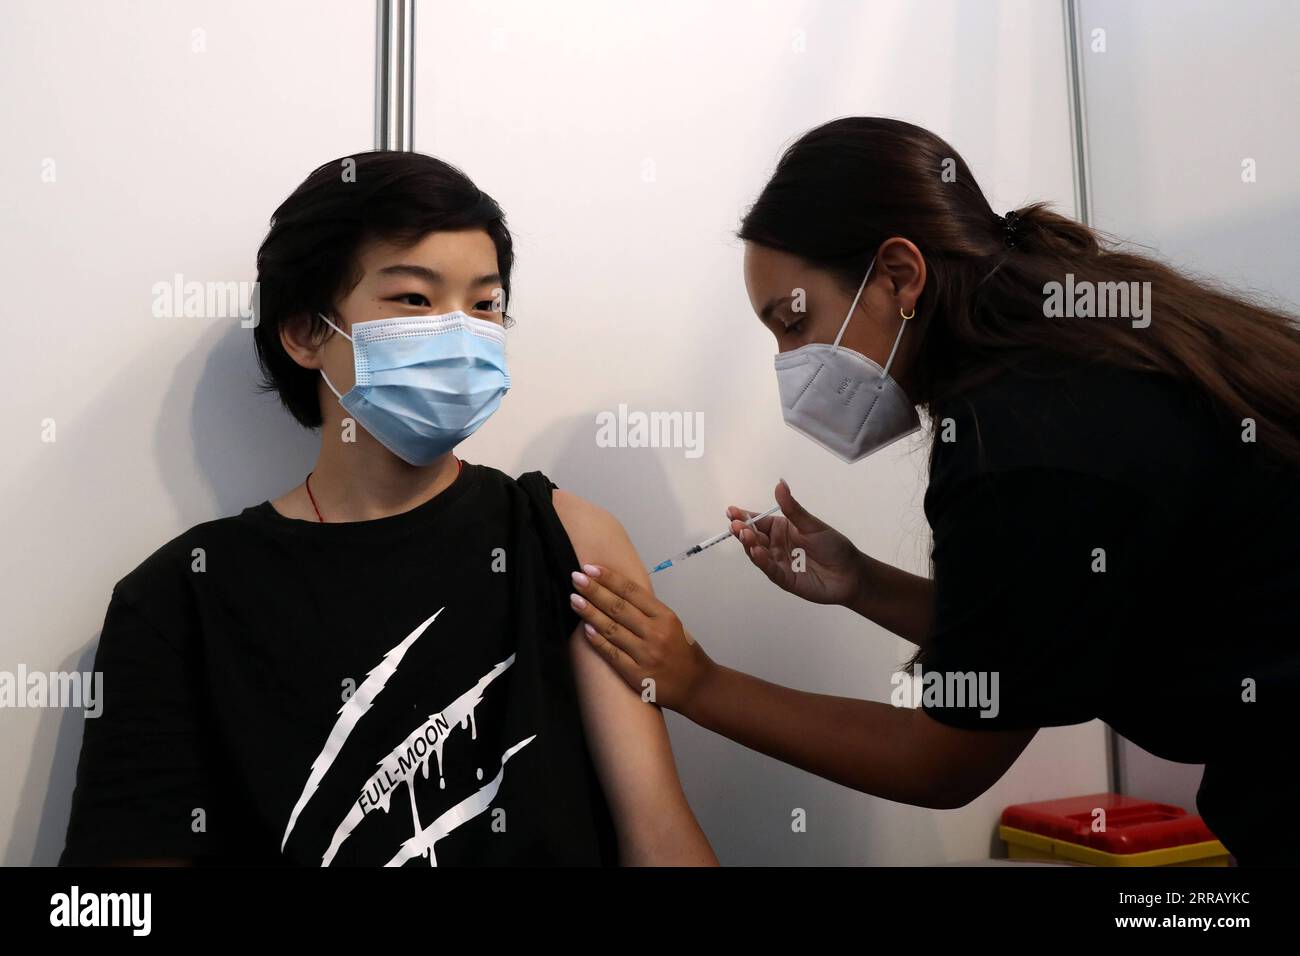 210822 -- LISBON, Aug. 22, 2021 -- A boy receives his first dose of the COVID-19 vaccine at a vaccination center in Oeiras, Portugal, Aug. 21, 2021. Portugal started inoculating adolescents aged 12 to 15 against COVID-19. The country has reached its target of fully vaccinating 70 percent of its population against COVID-19. Photo by /Xinhua PORTUGAL-LISBON-VACCINATION-ADOLESCENTS PedroxFiuza PUBLICATIONxNOTxINxCHN Stock Photo